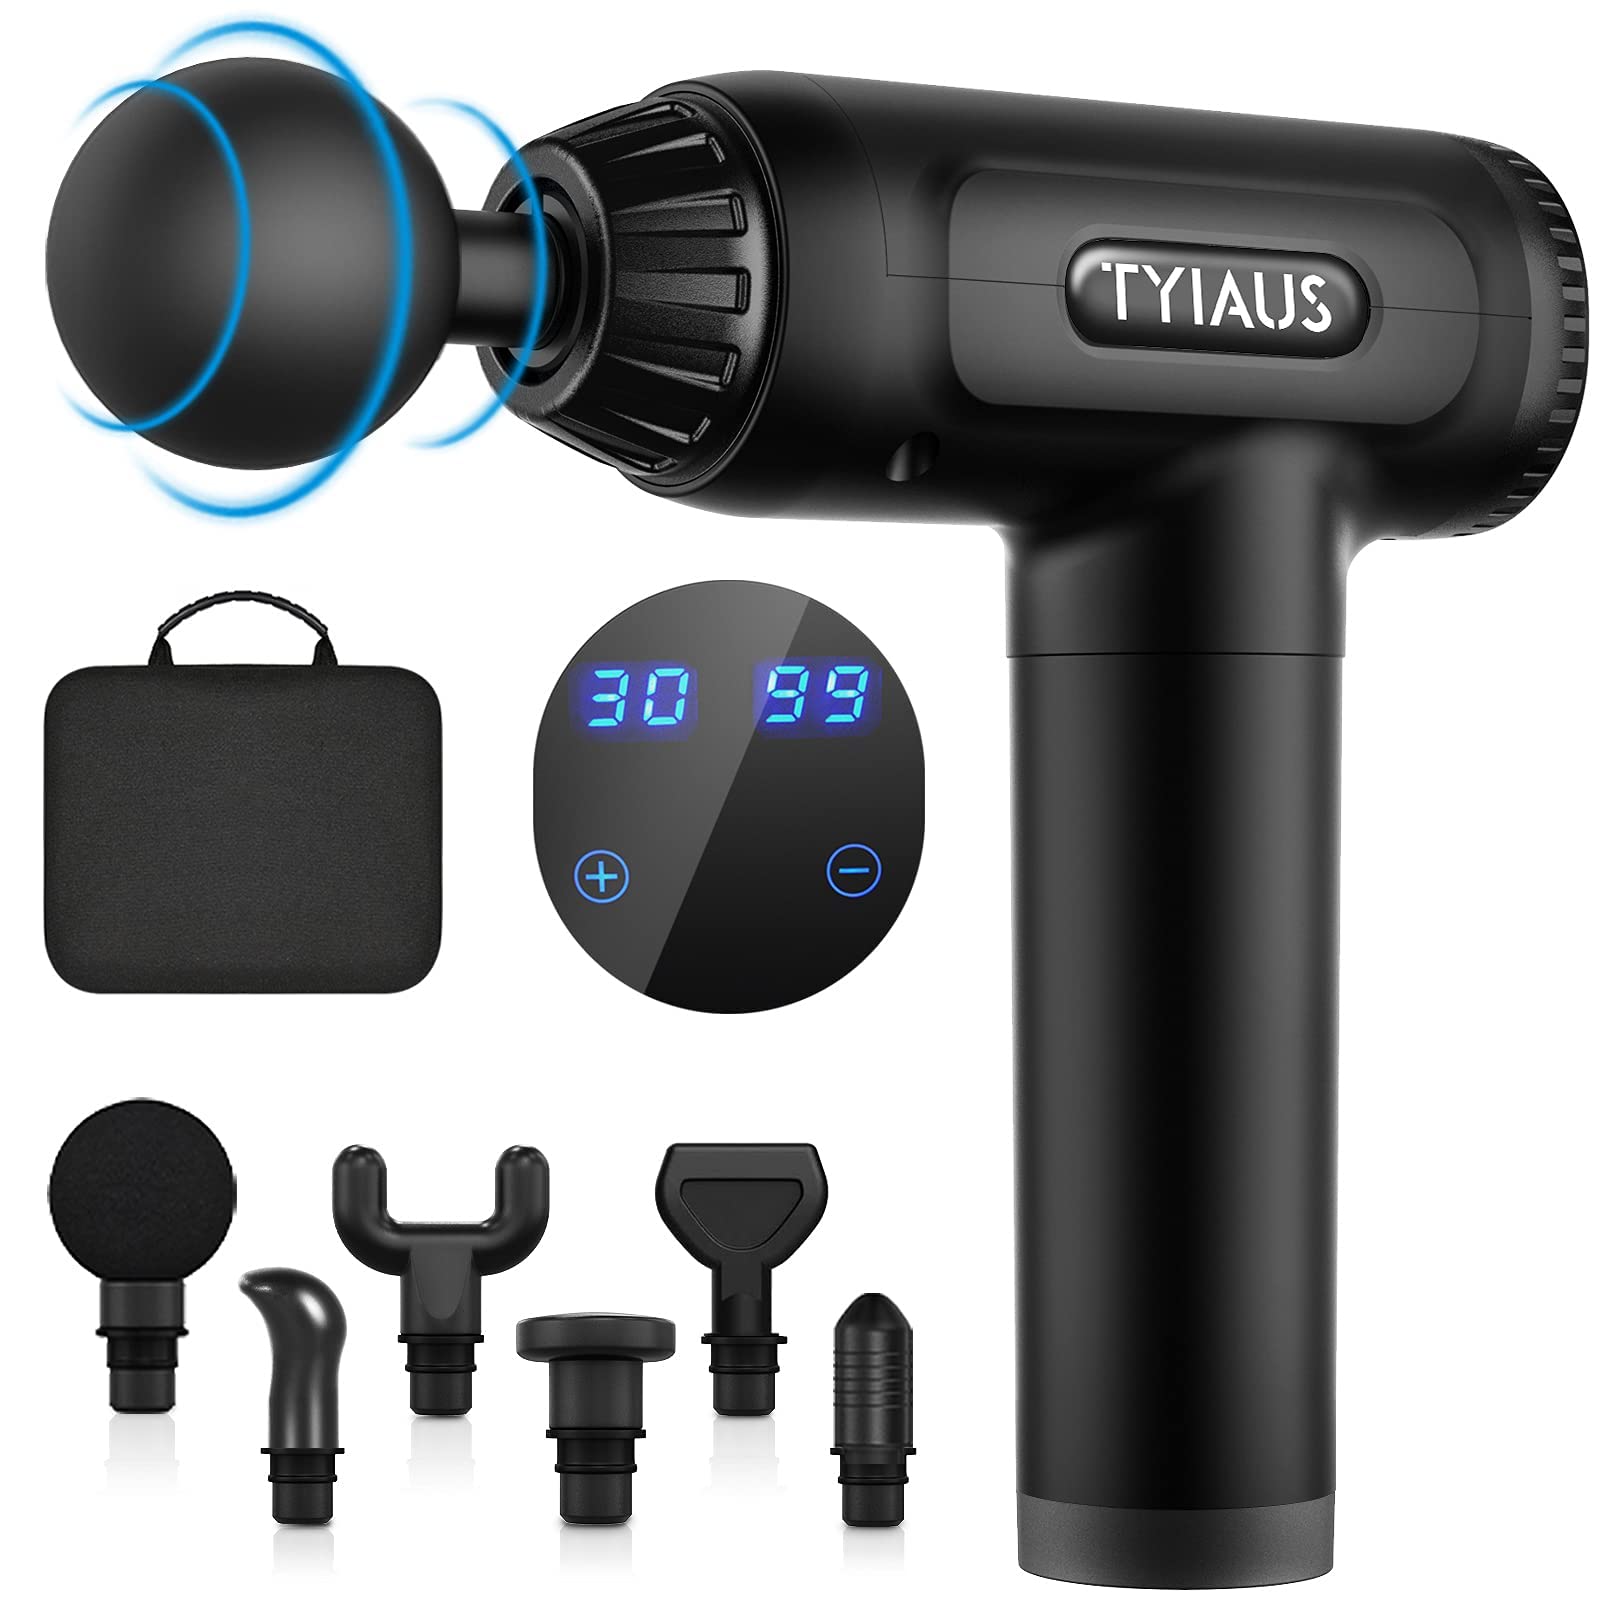 Muscle Massage Gun - TYIAUS Percussion Massager Gun Deep Tissue with 30  Adjustable Speeds and 6 Heads, Portable Body Muscle Massager for Office Gym  Home Post-Workout Recovery Black